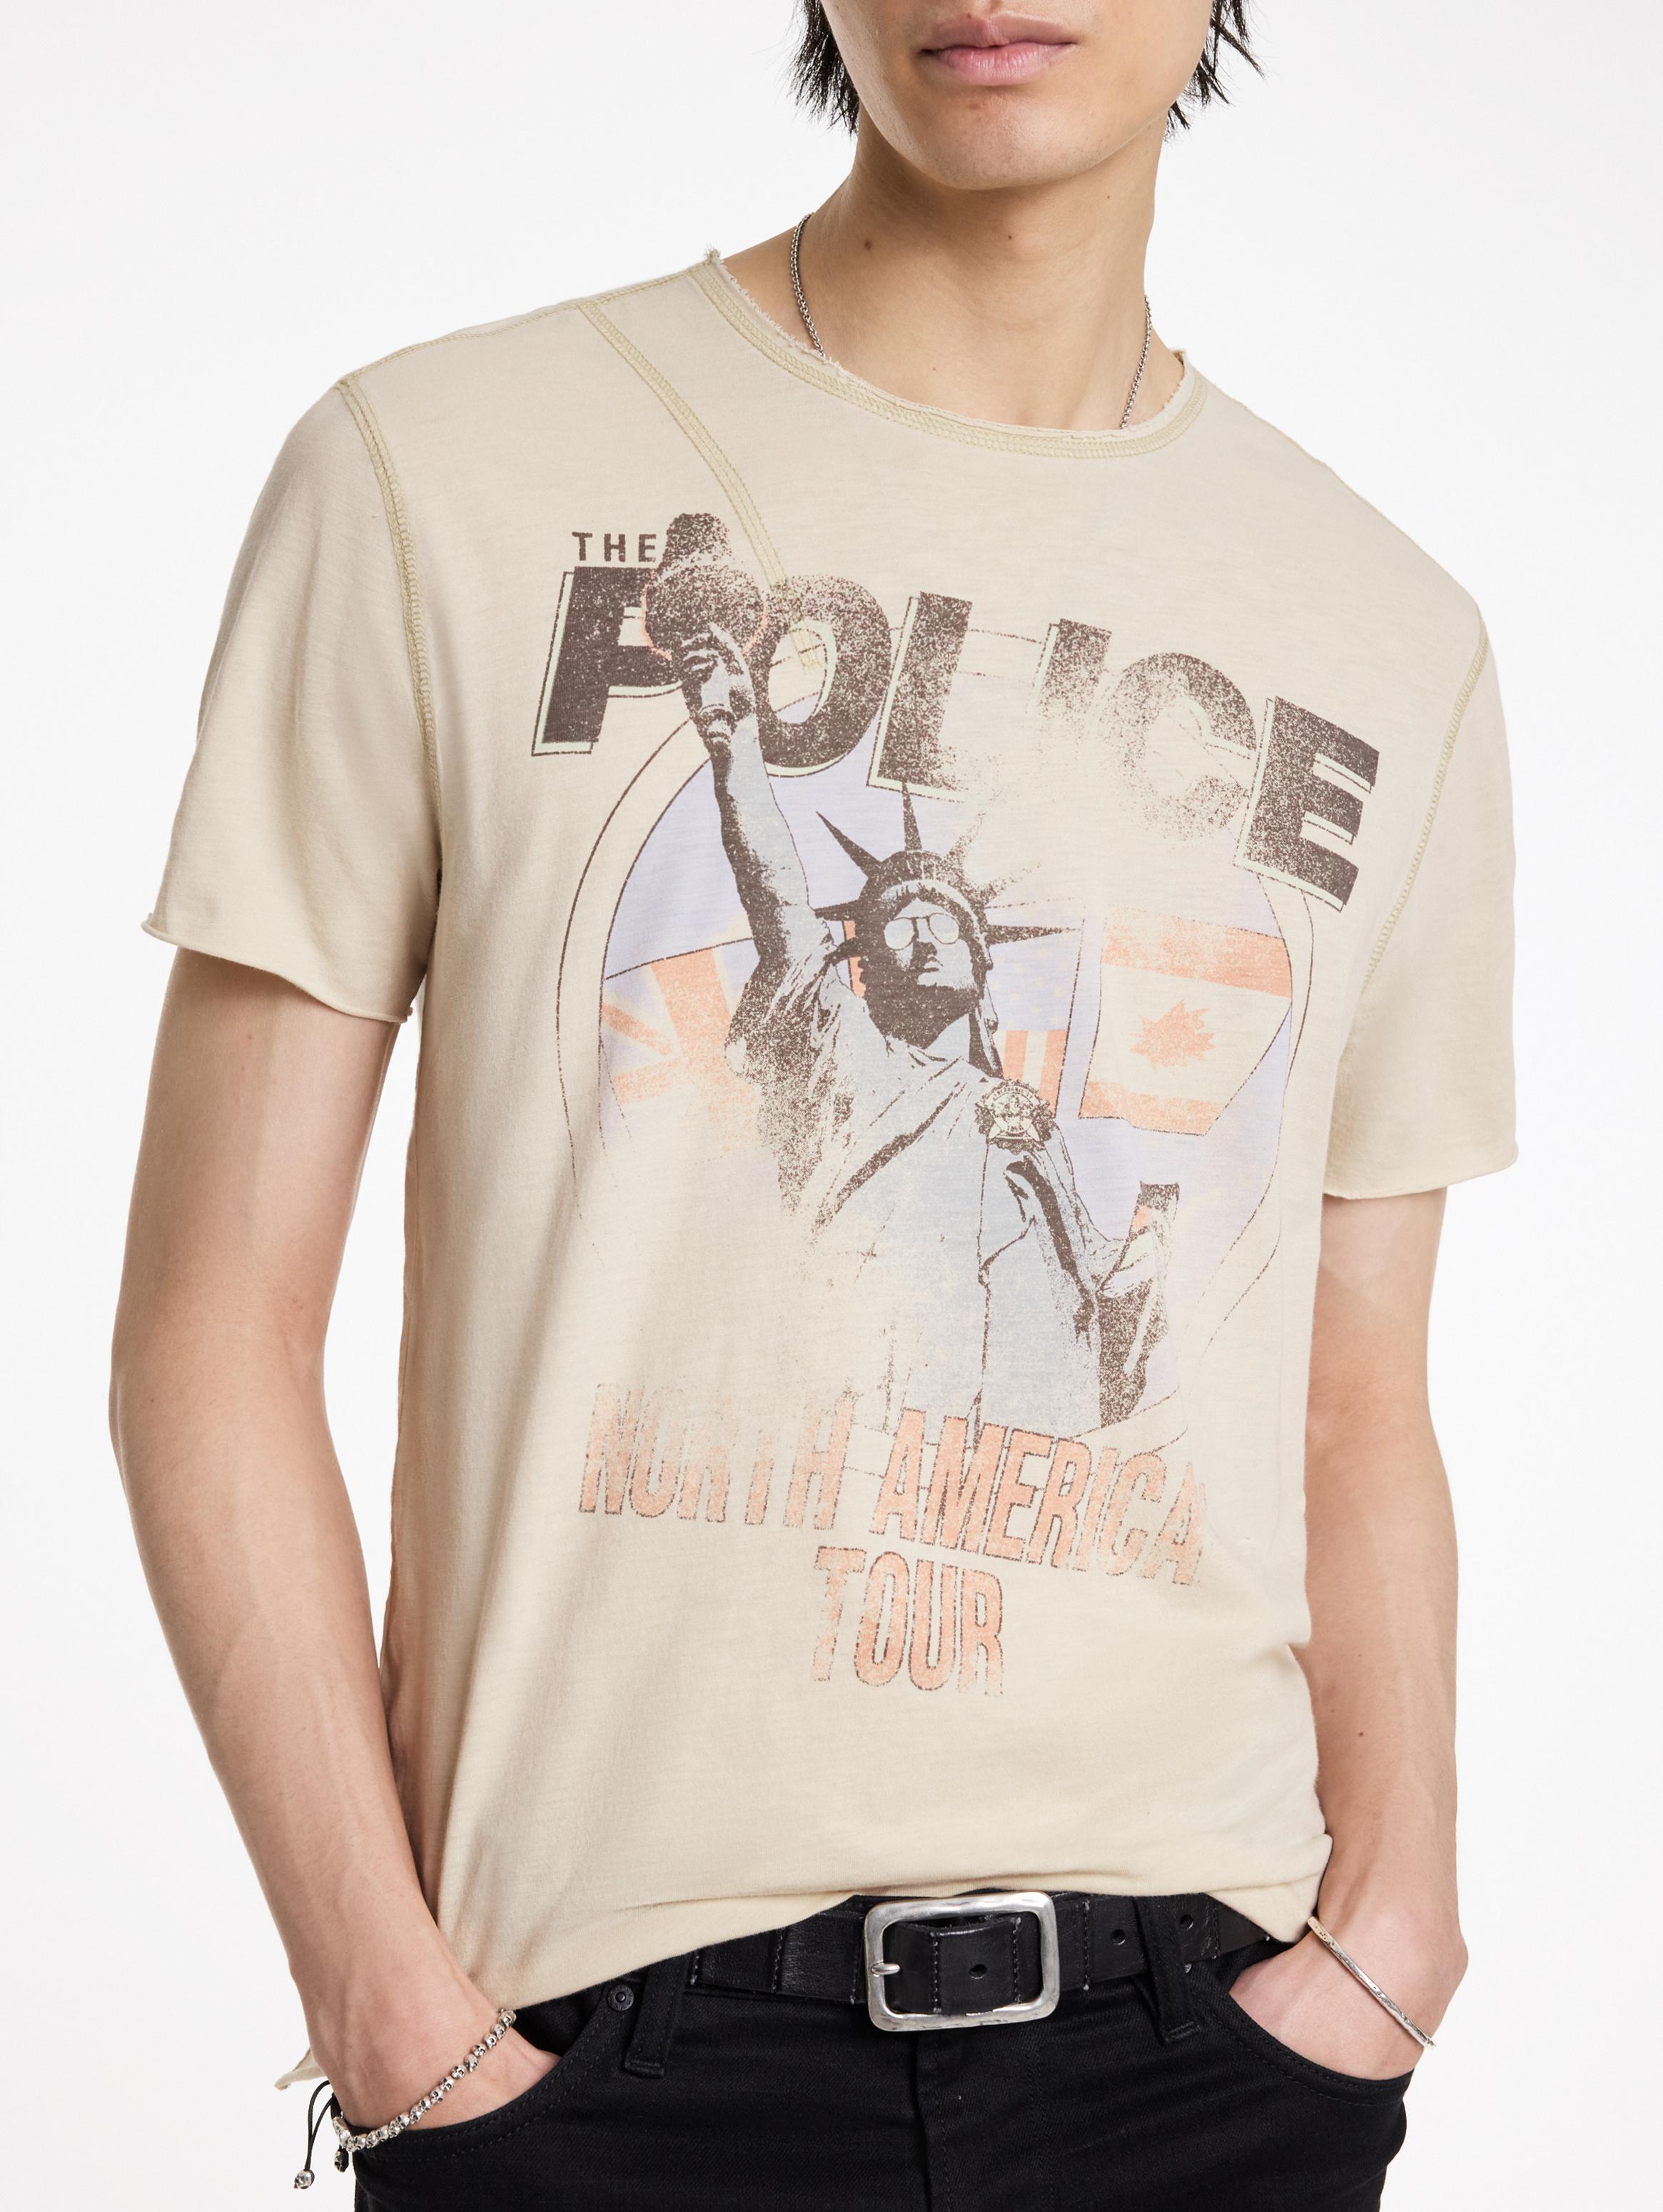 THE POLICE TOUR TEE image number 5